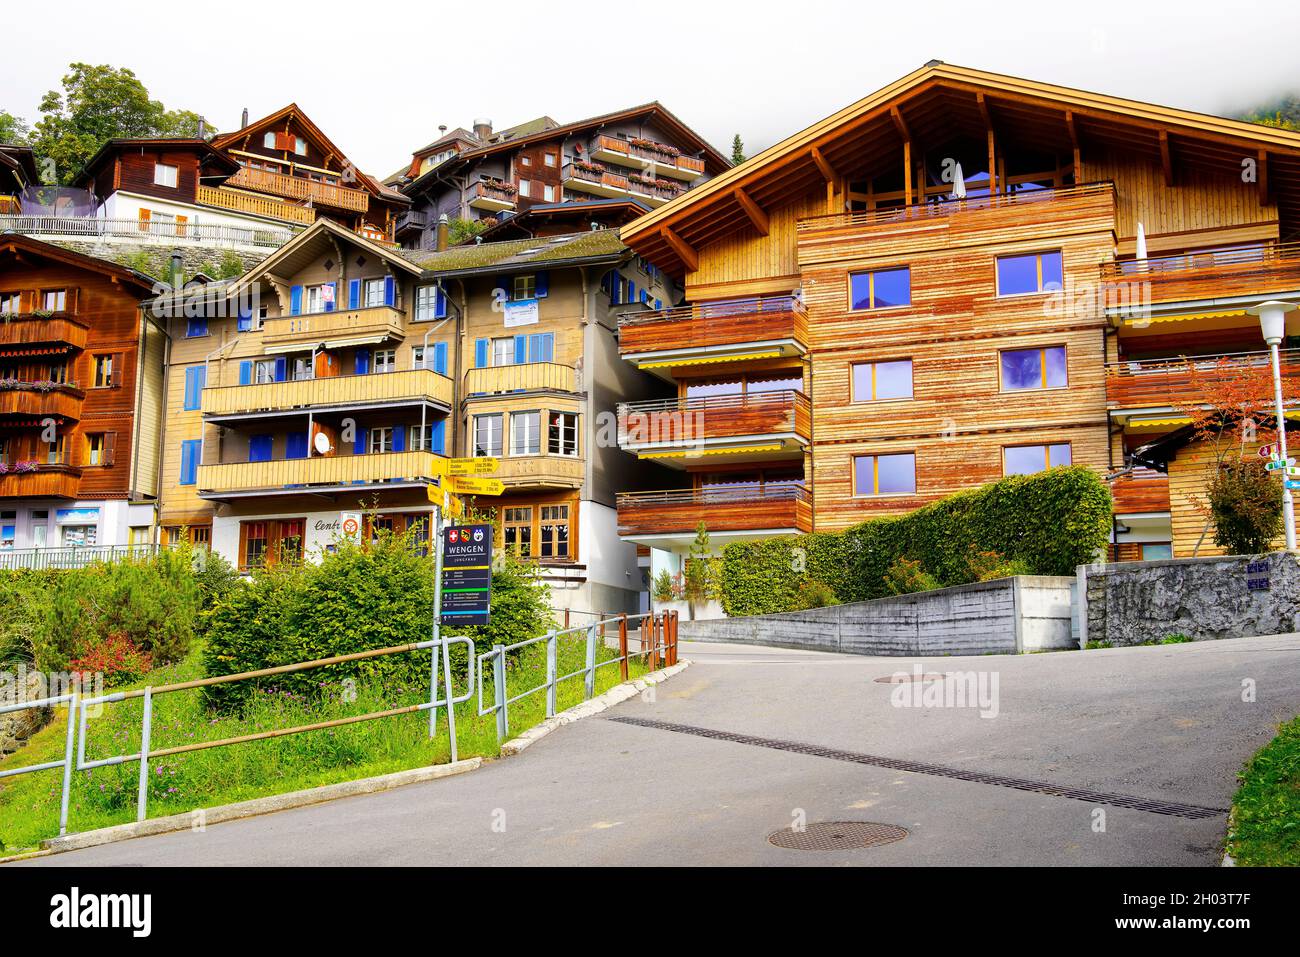 View of timber chalets and belle époque hotels in Wengen. Canton of Bern, Switzerland. Wengen is a Swiss Alpine village in the Bernese Oberland region Stock Photo